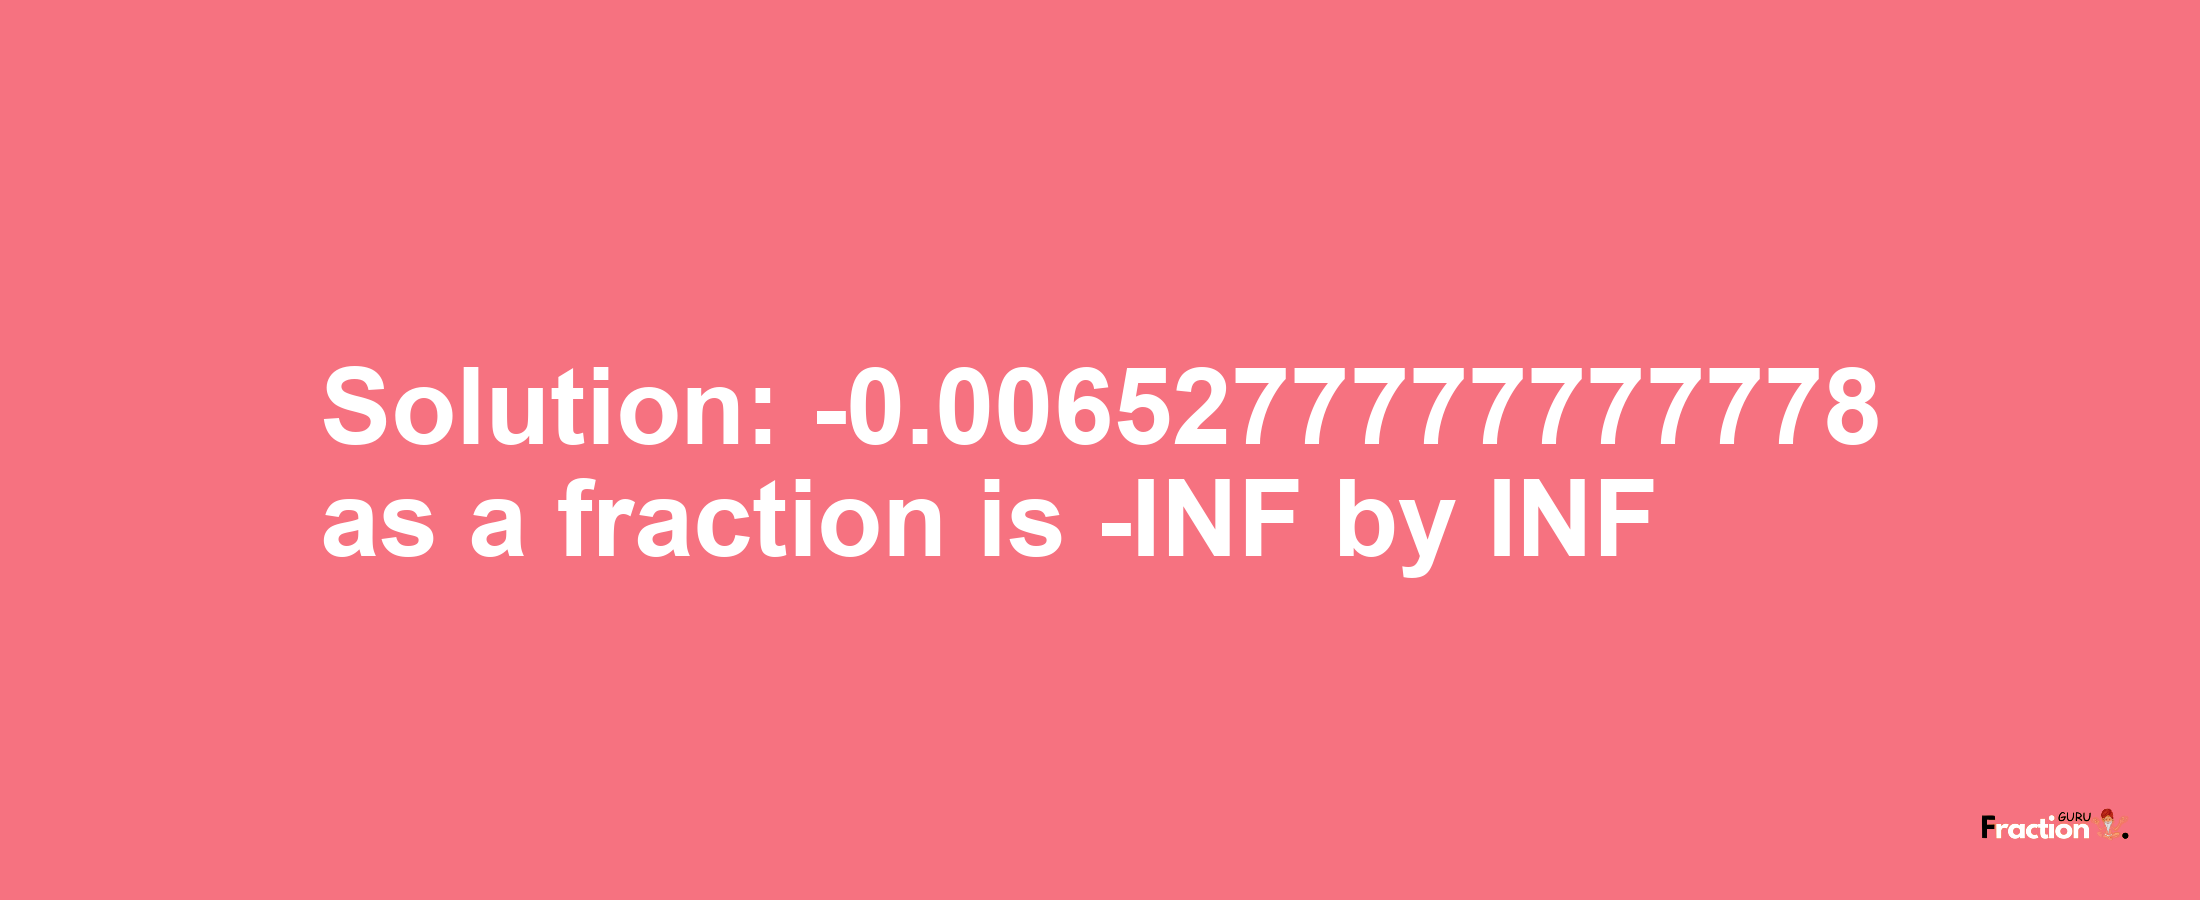 Solution:-0.0065277777777778 as a fraction is -INF/INF